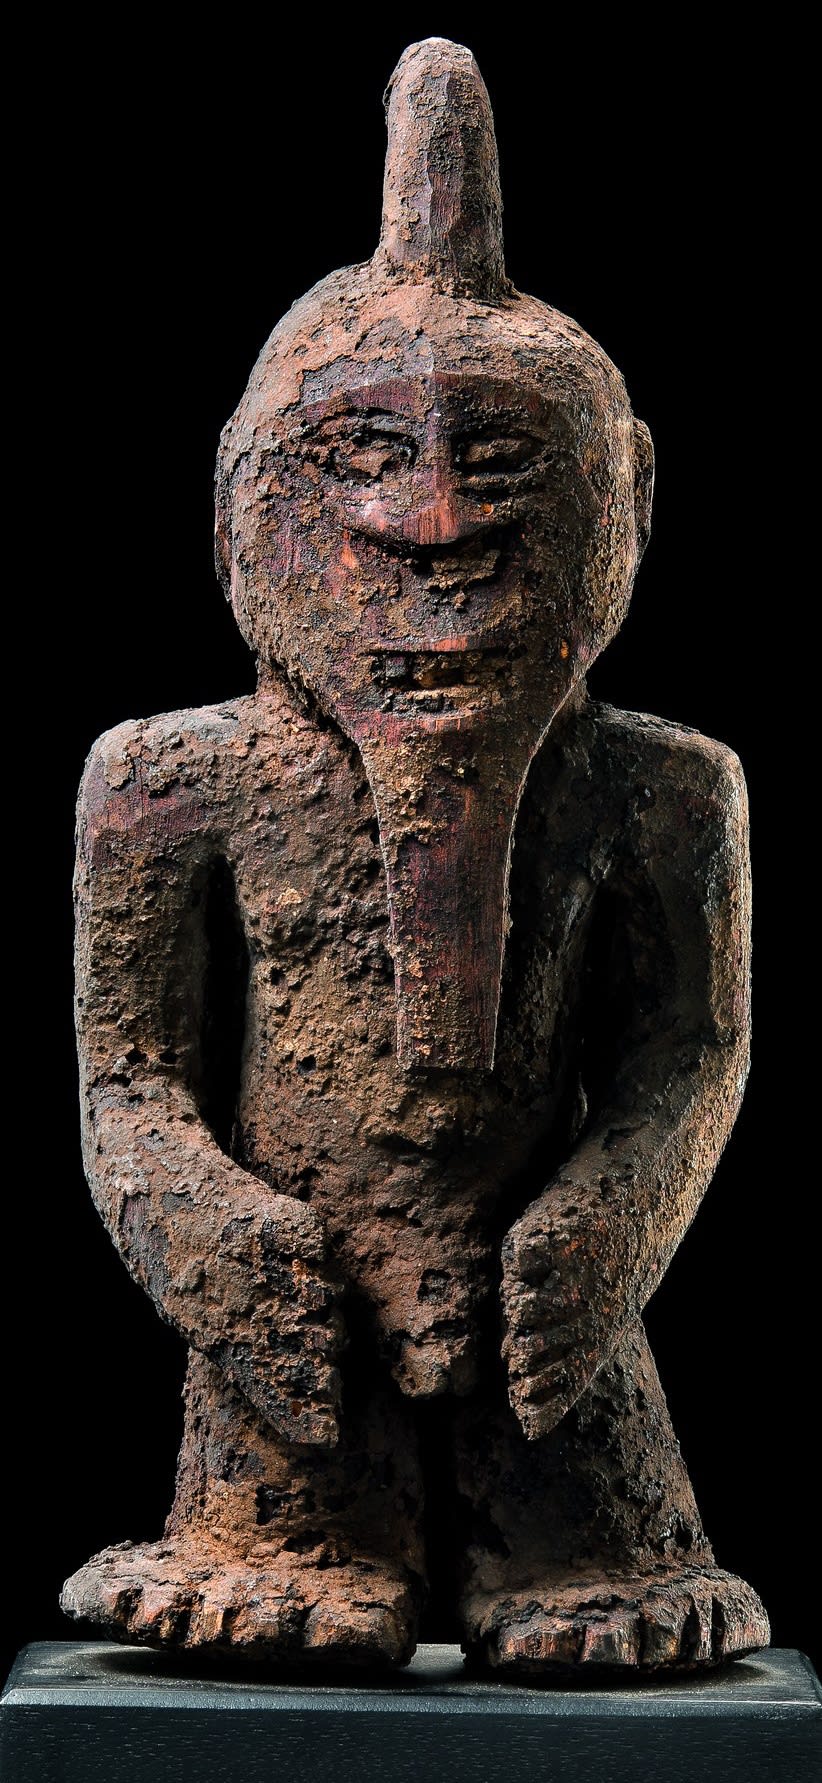 Kaka figure. Height: 42 cm. Photo by Volker Thomas & Thomas Other, Nürnberg. Image courtesy of the Africarium Collection.